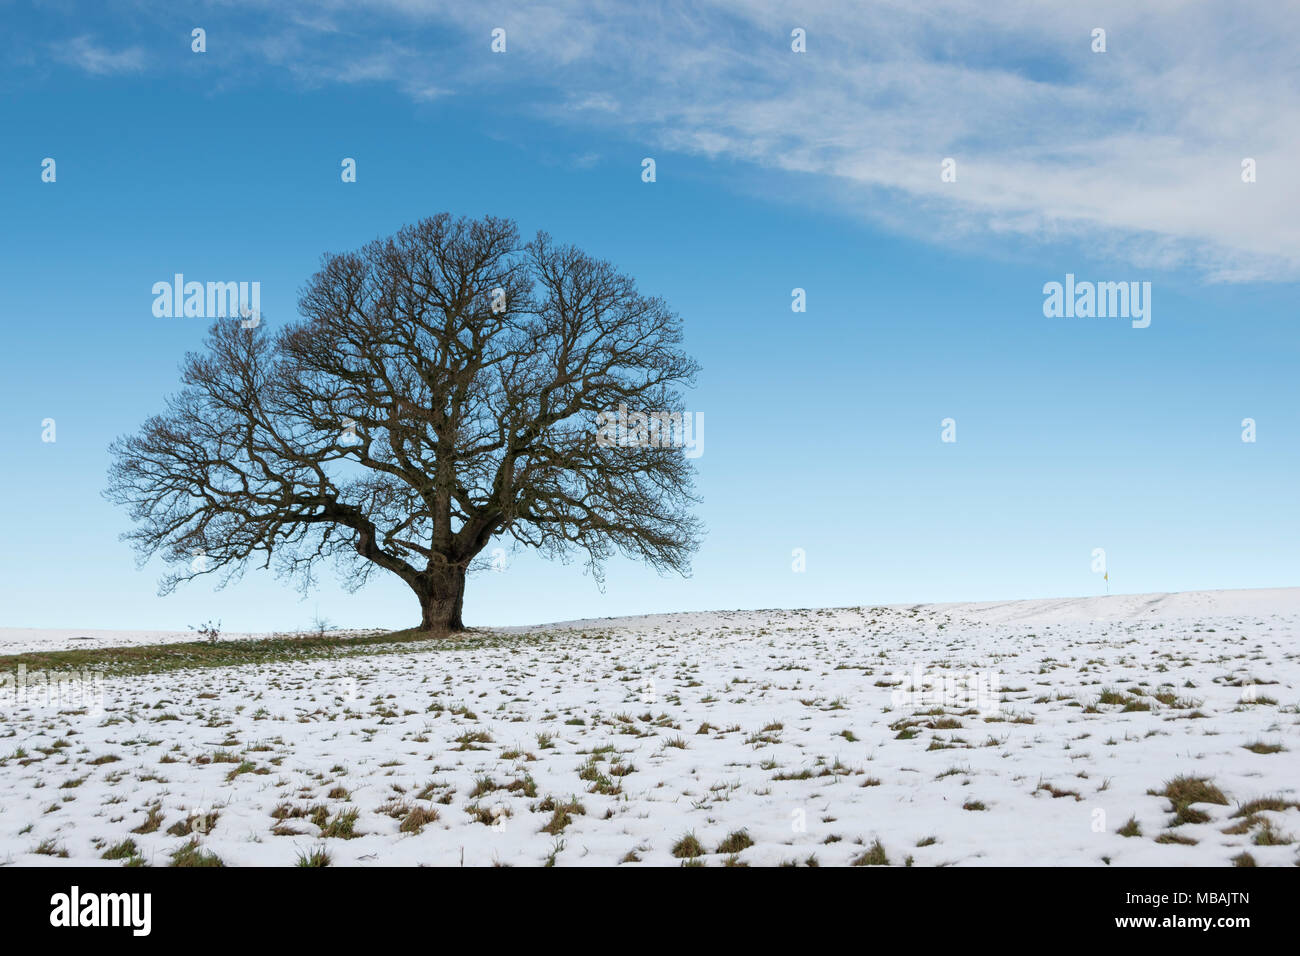 Lone oak tree standing against a blue sky on snow covered grass, Ashton Court, Bristol Stock Photo